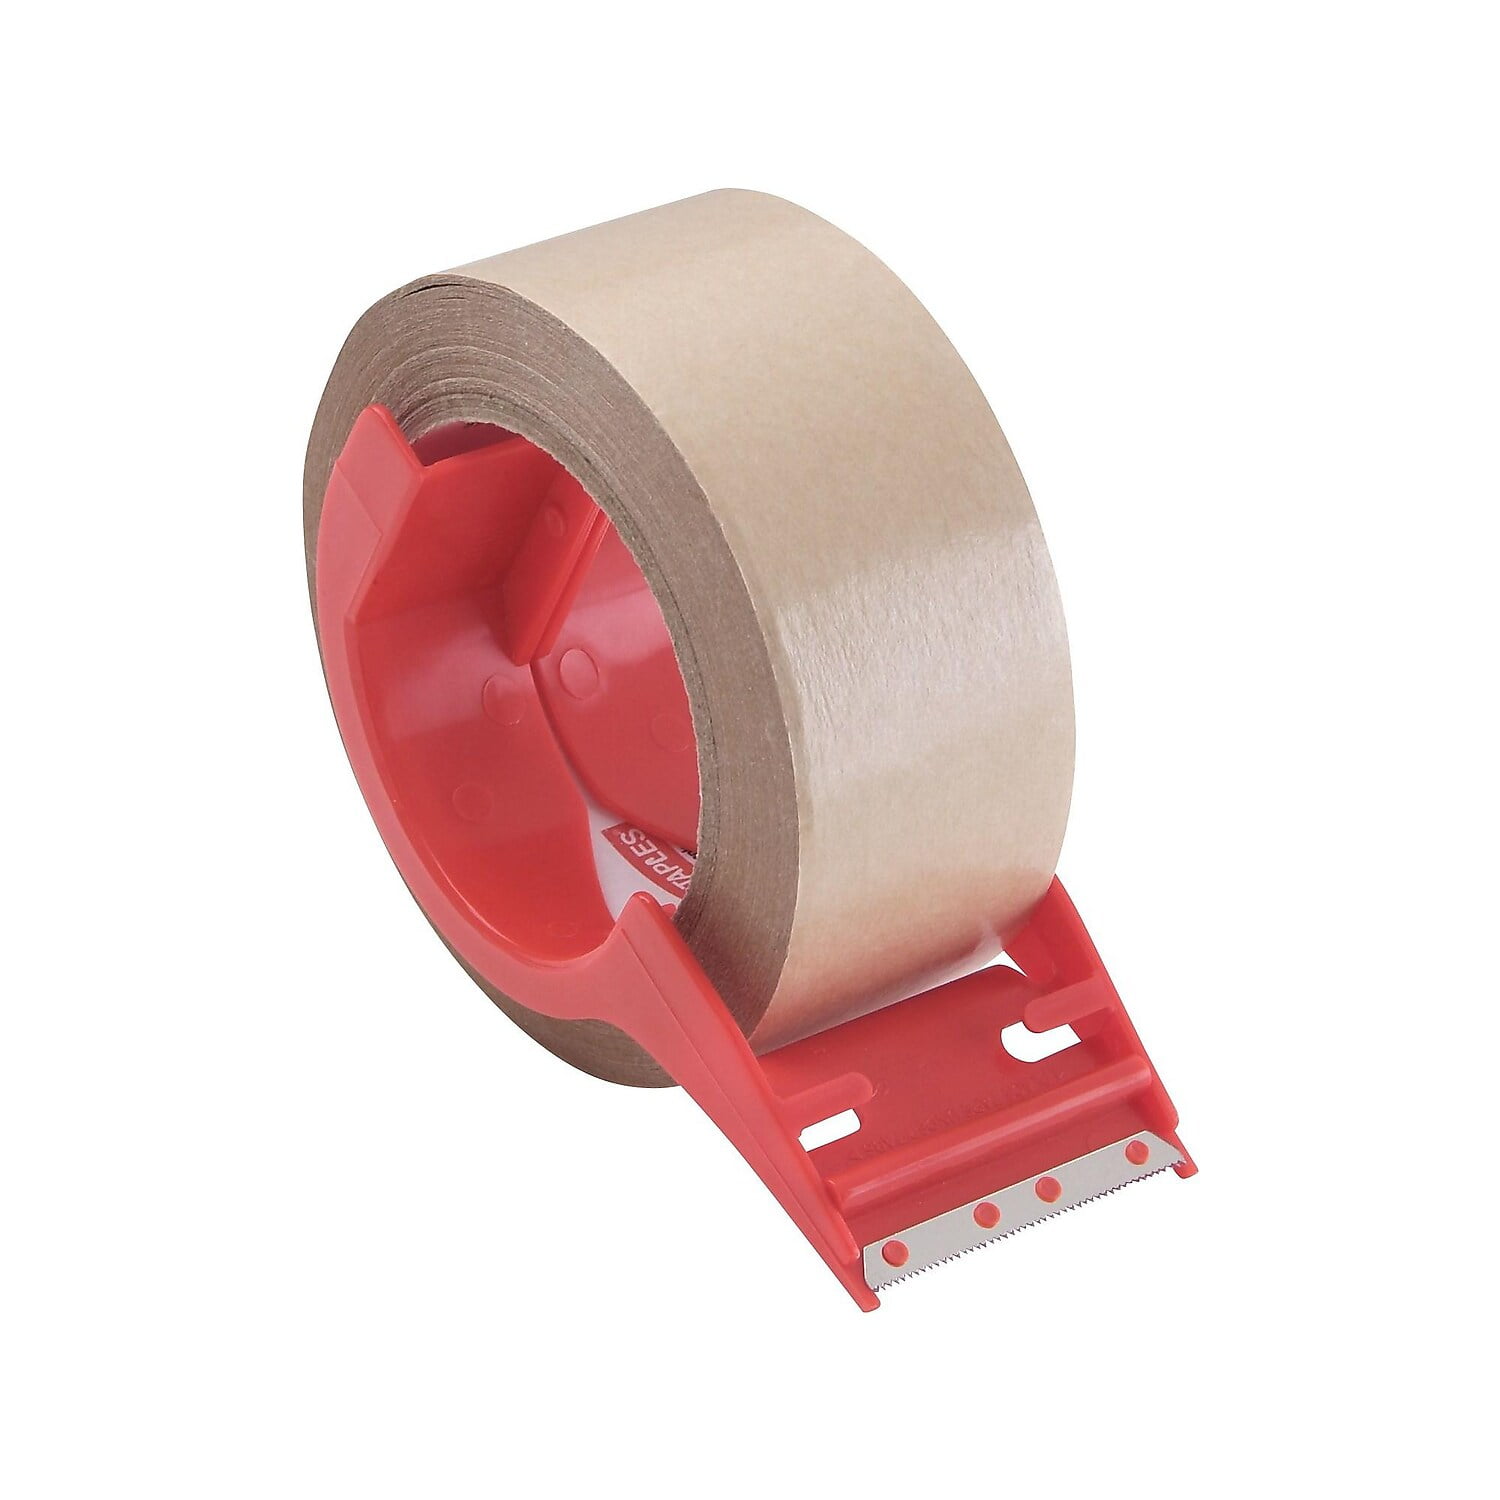 3M Scotch 45mm x 45m C 3 P Tape Packaging Packing Kit Brown Color -  AliExpress